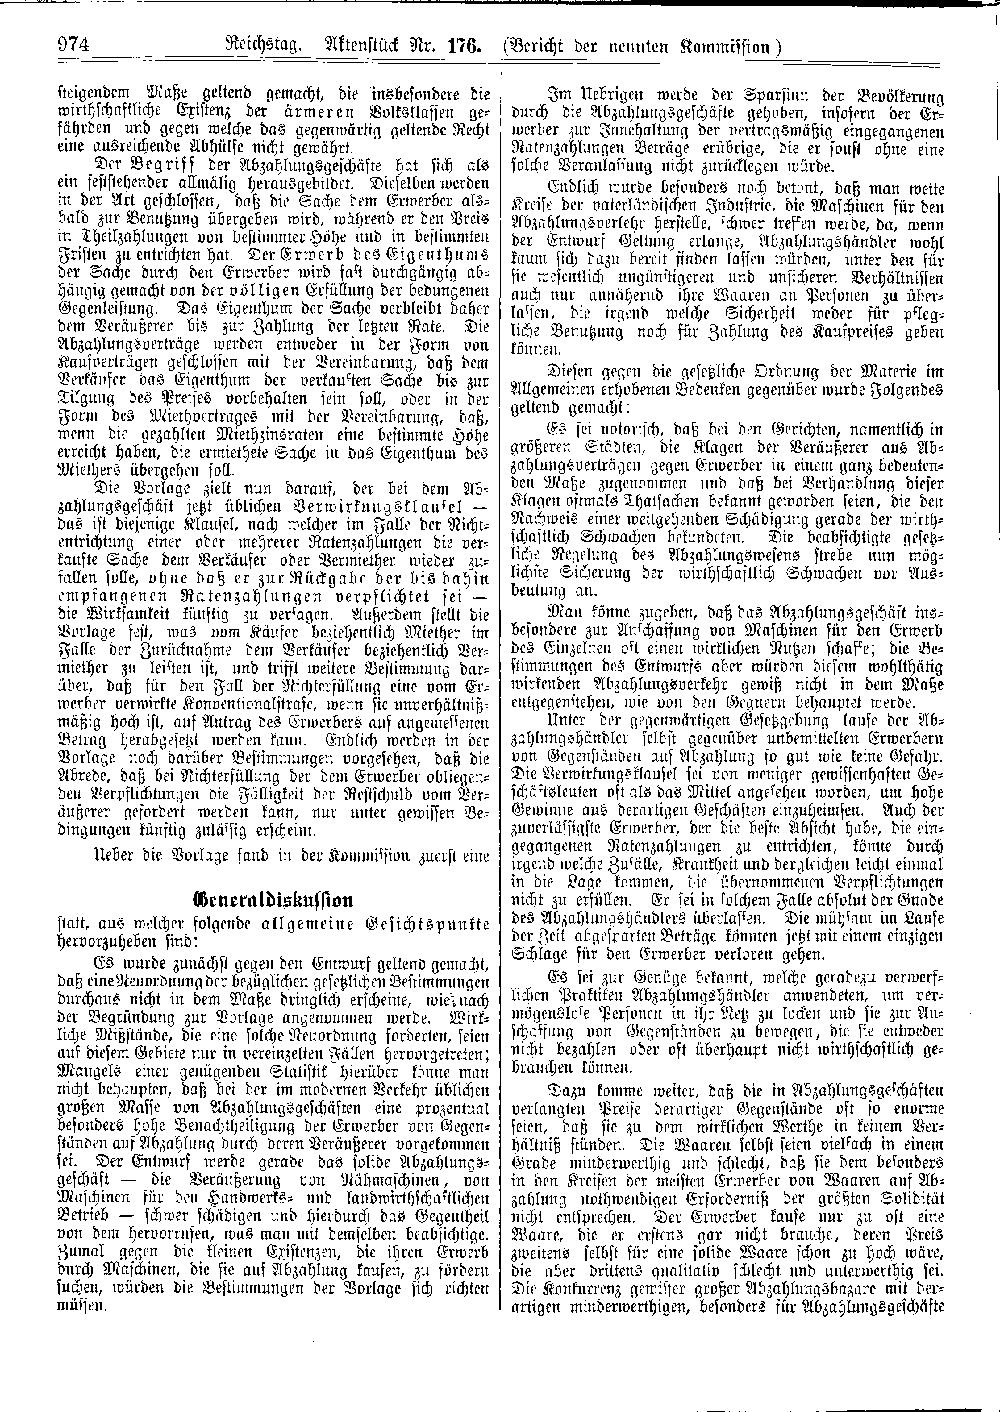 Scan of page 974